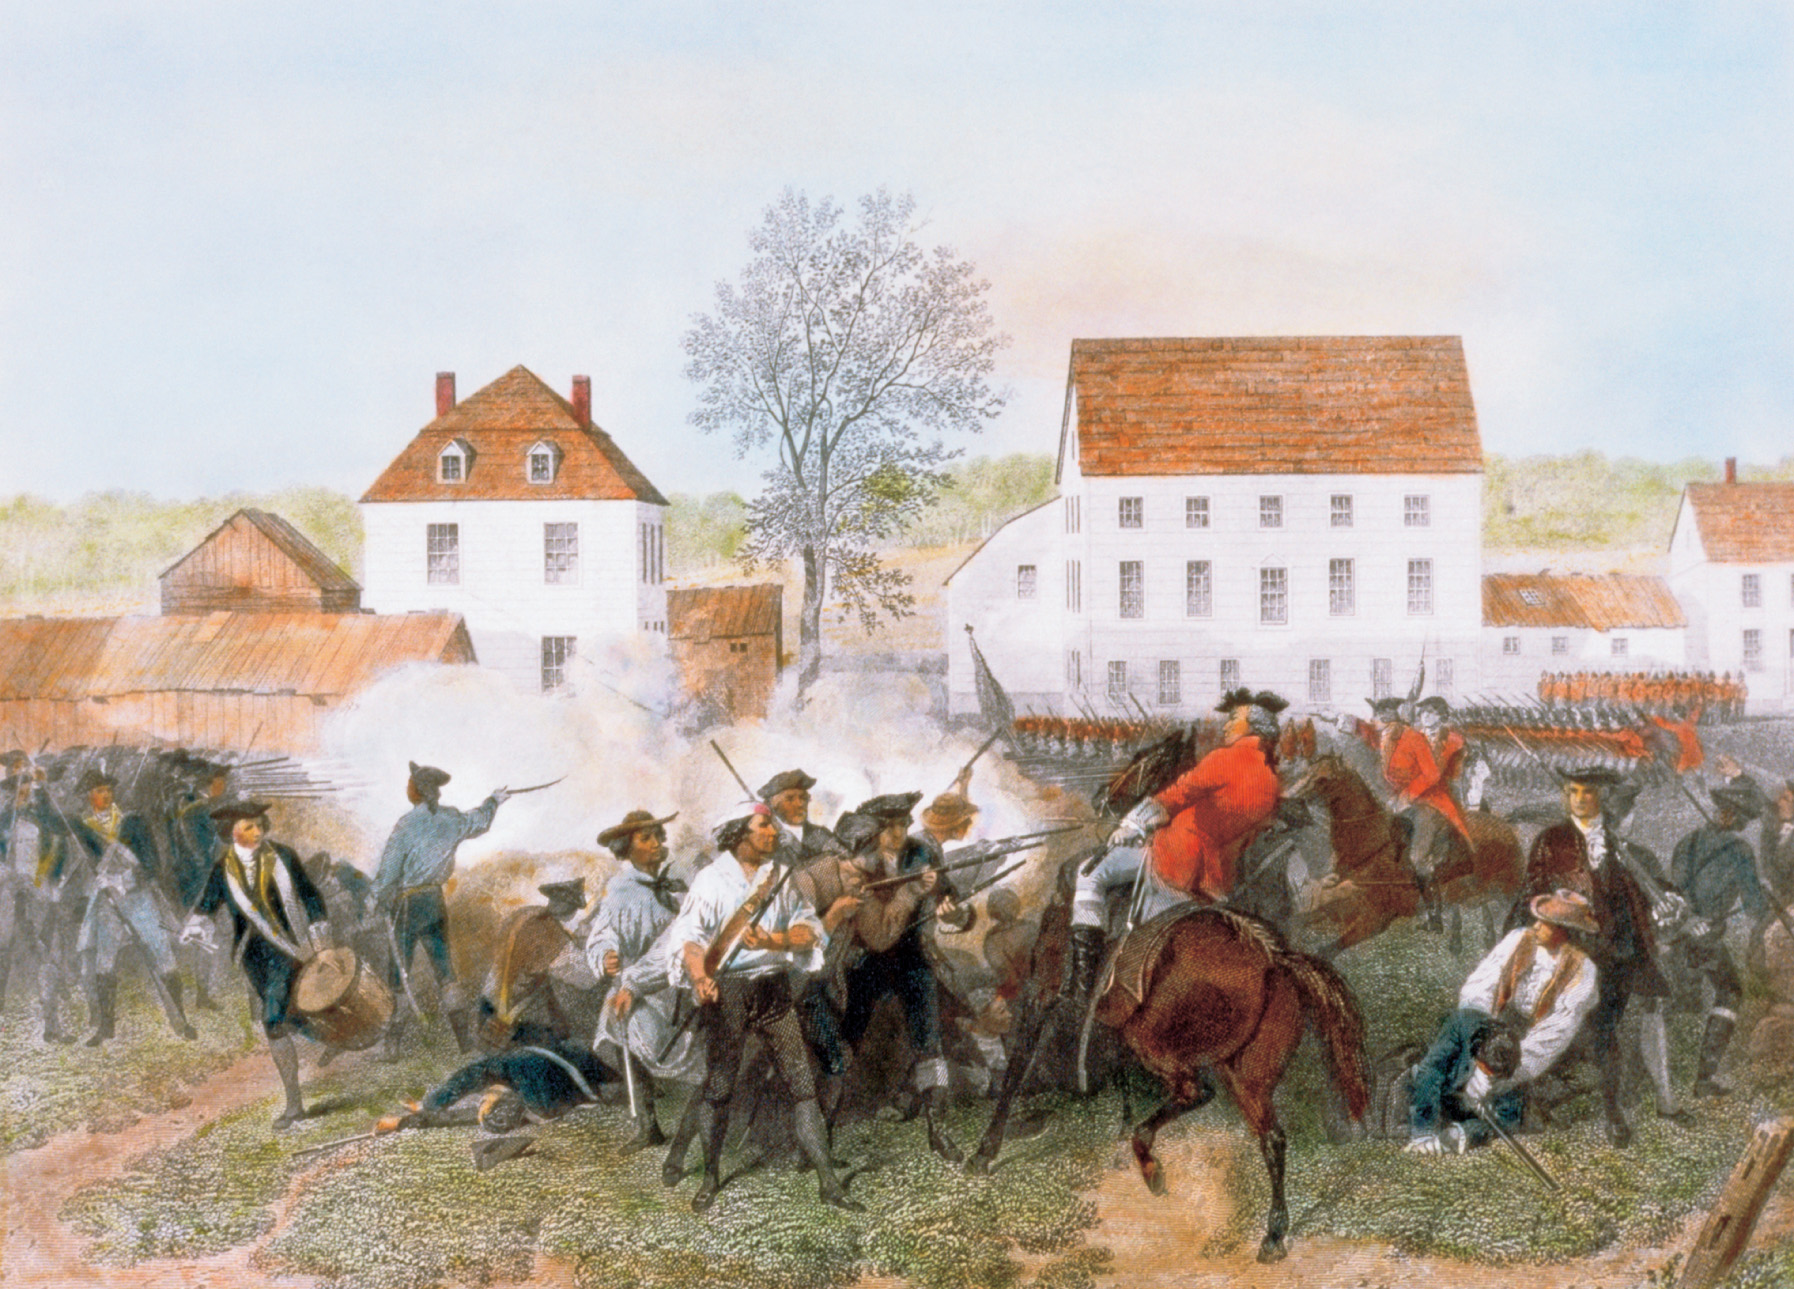 painting: colonists, some in civilan clothes, and exchange gunfire with British soldiers in red coats.